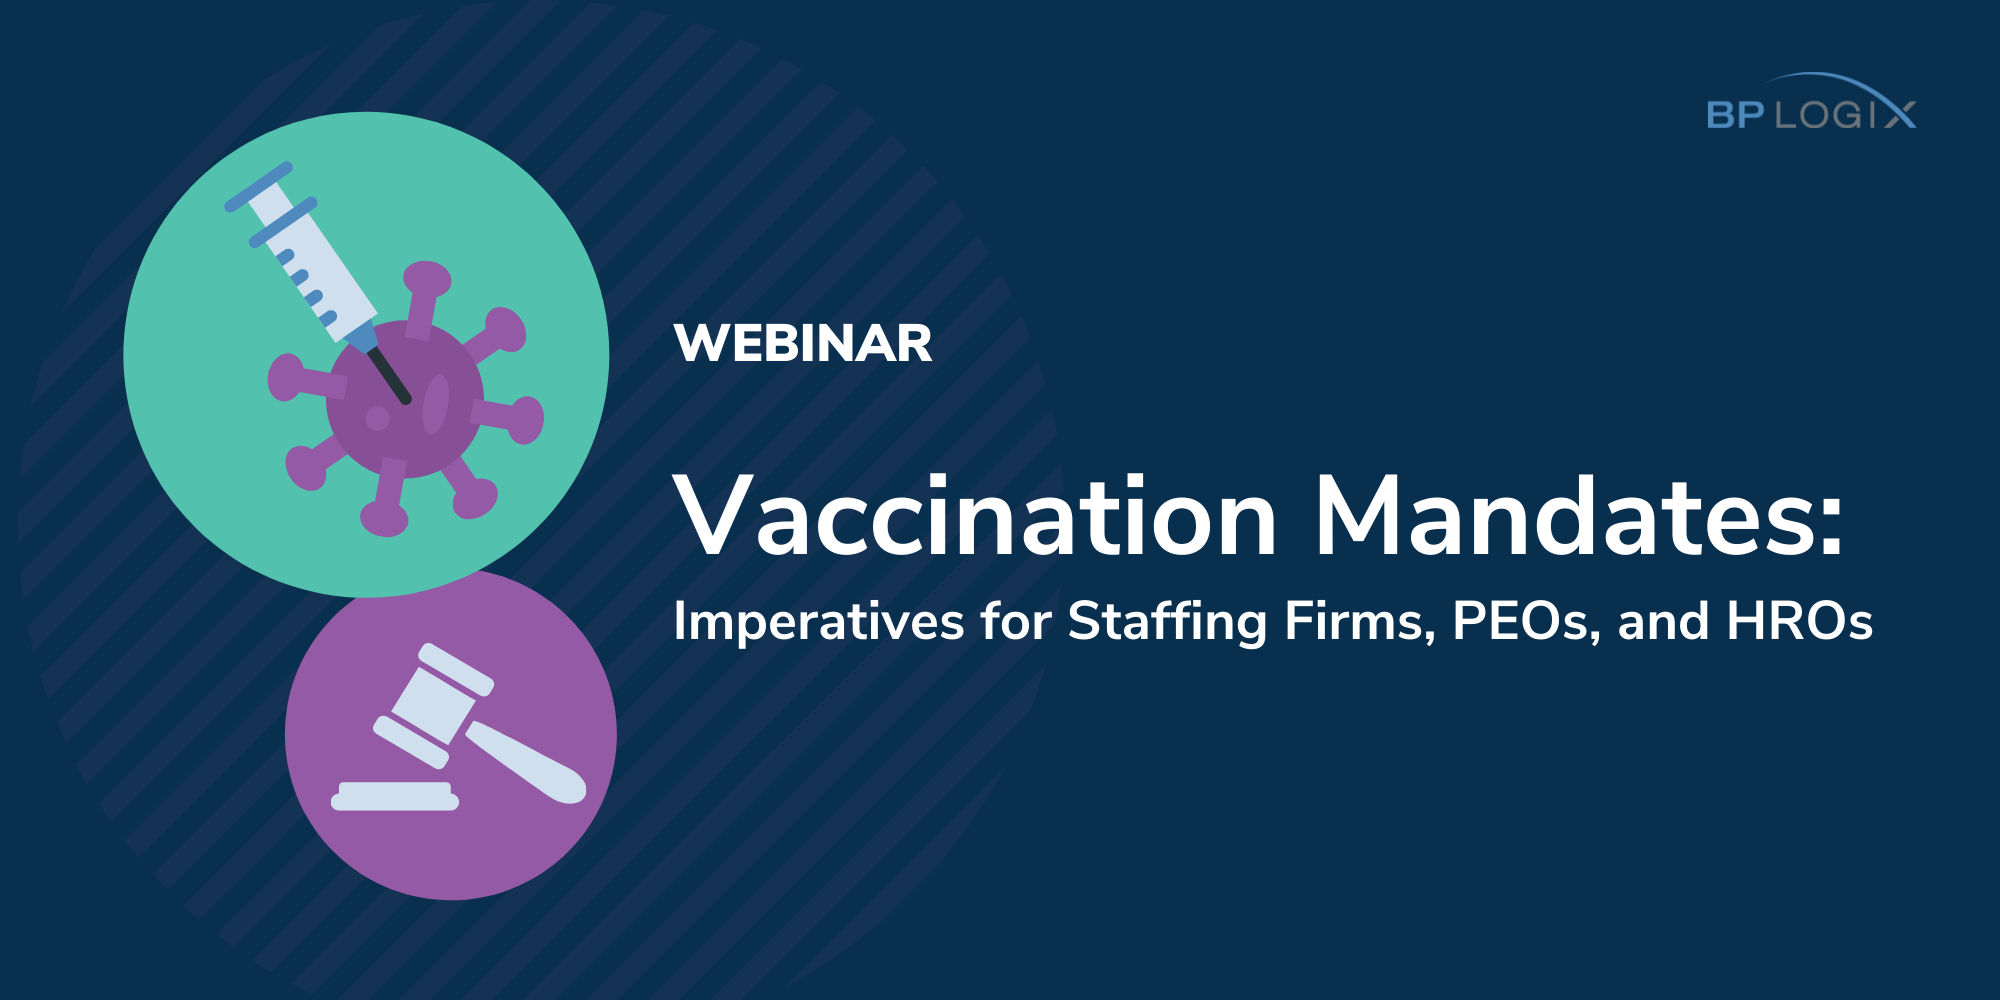 Read next post: Vaccination Mandates for Staffing Firms, PEOs, & HROs